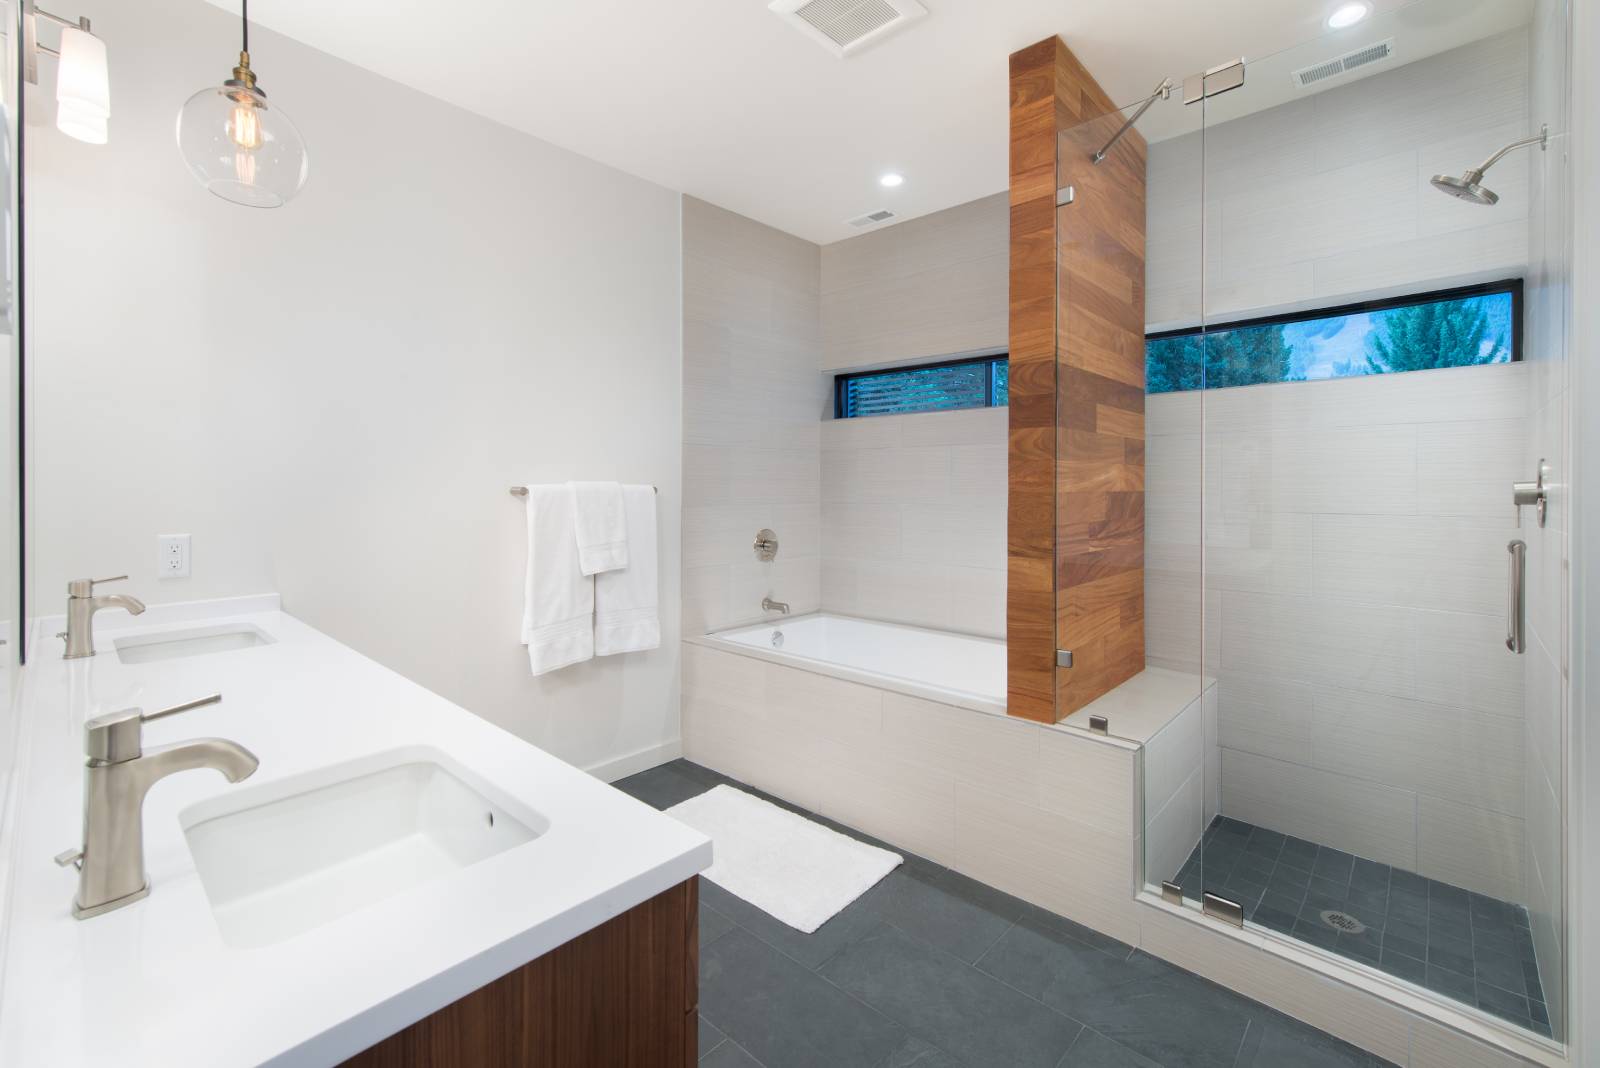 Interior view of the main bathroom at Gill 3+4, a custom home designed and built by Farmer Payne Architects.